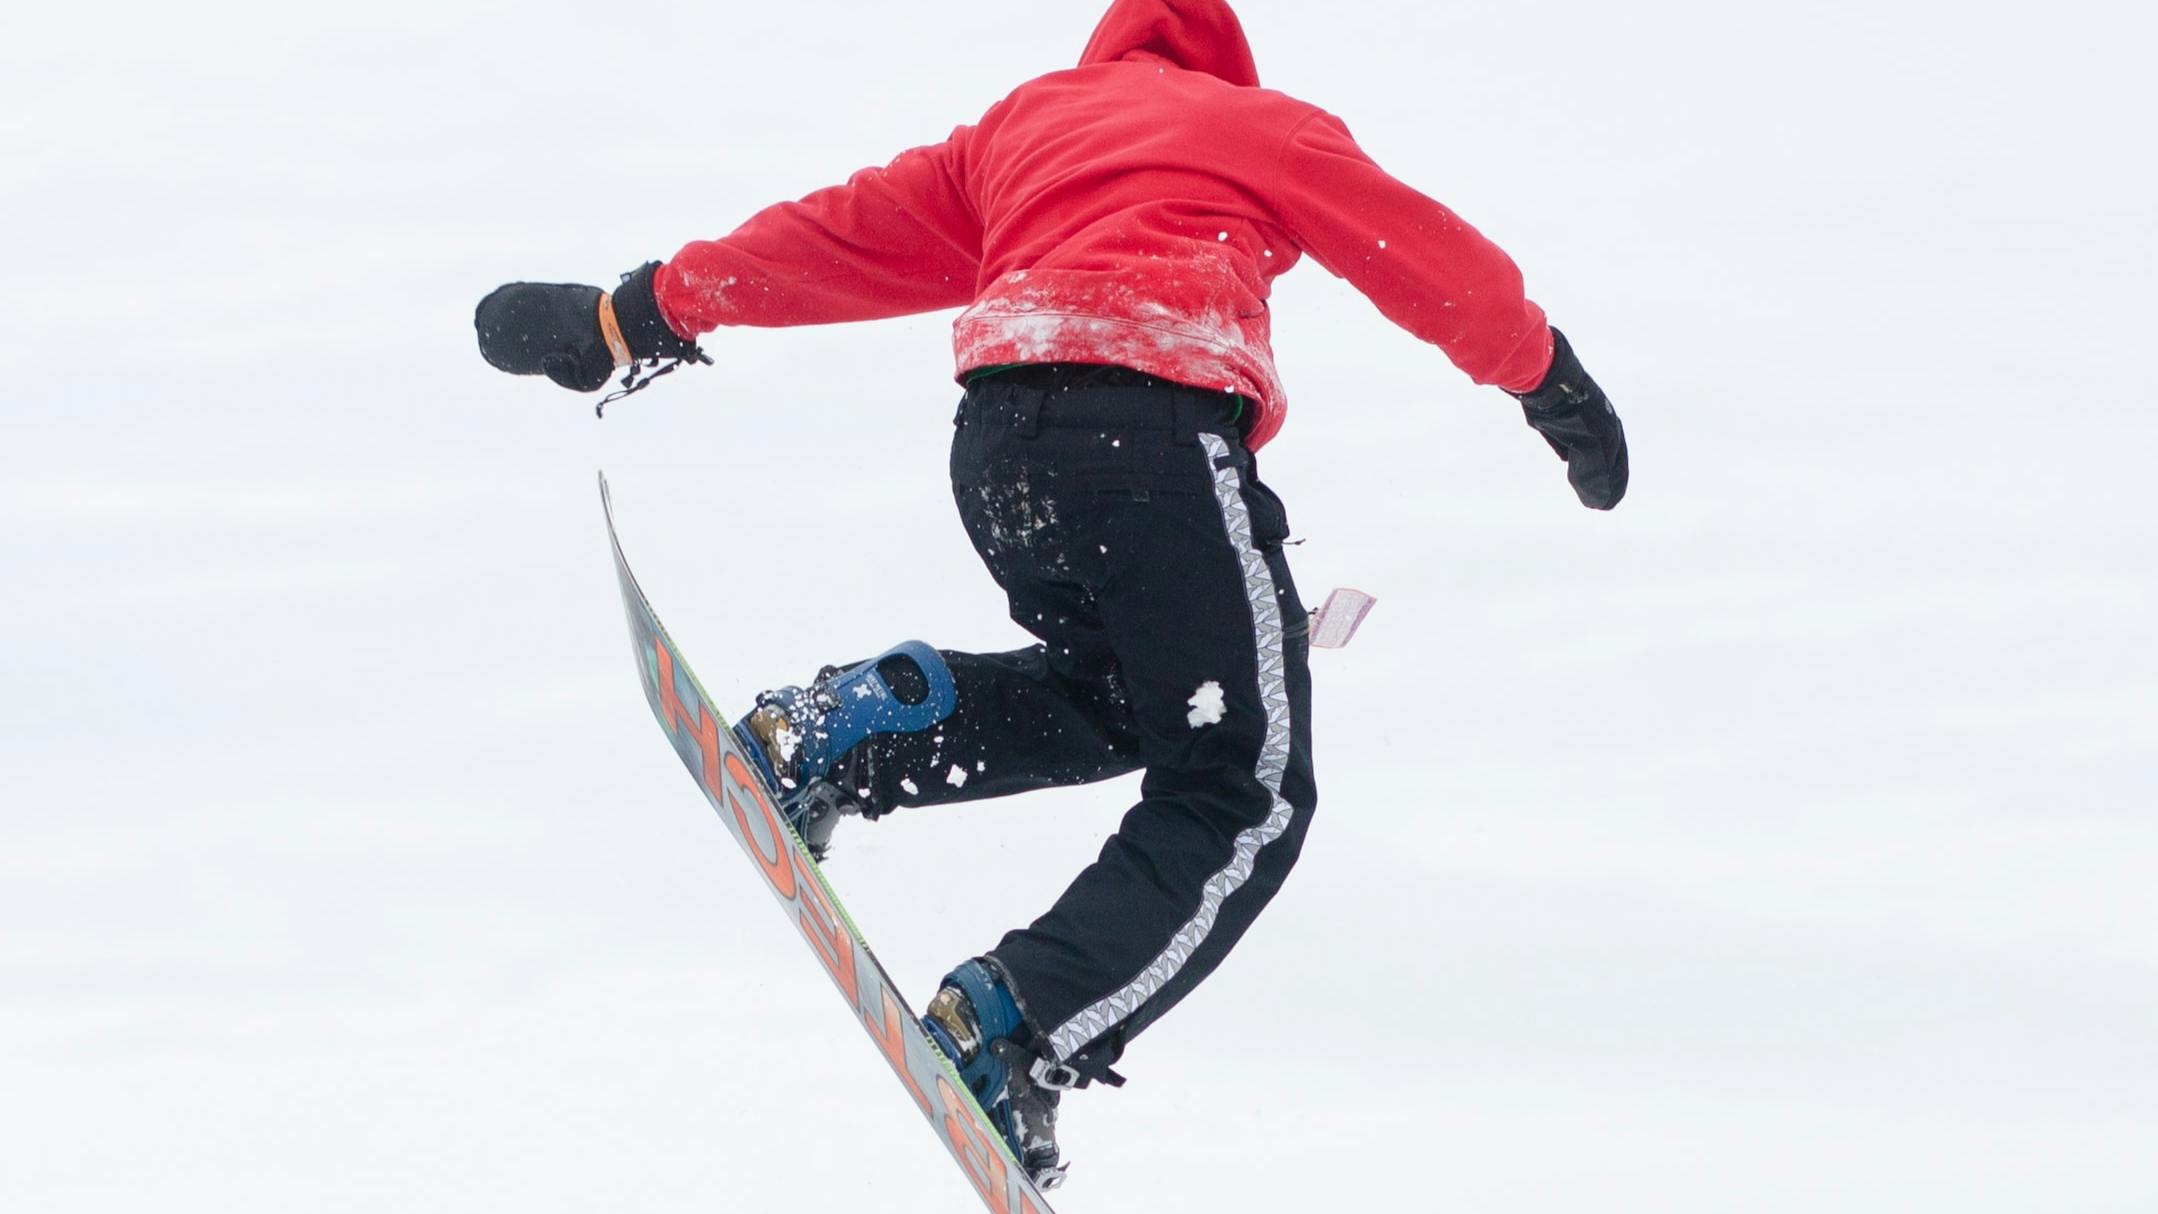 Snowboarder in a bright red jacket and black snow pants flying through the air in a snowboard trick.